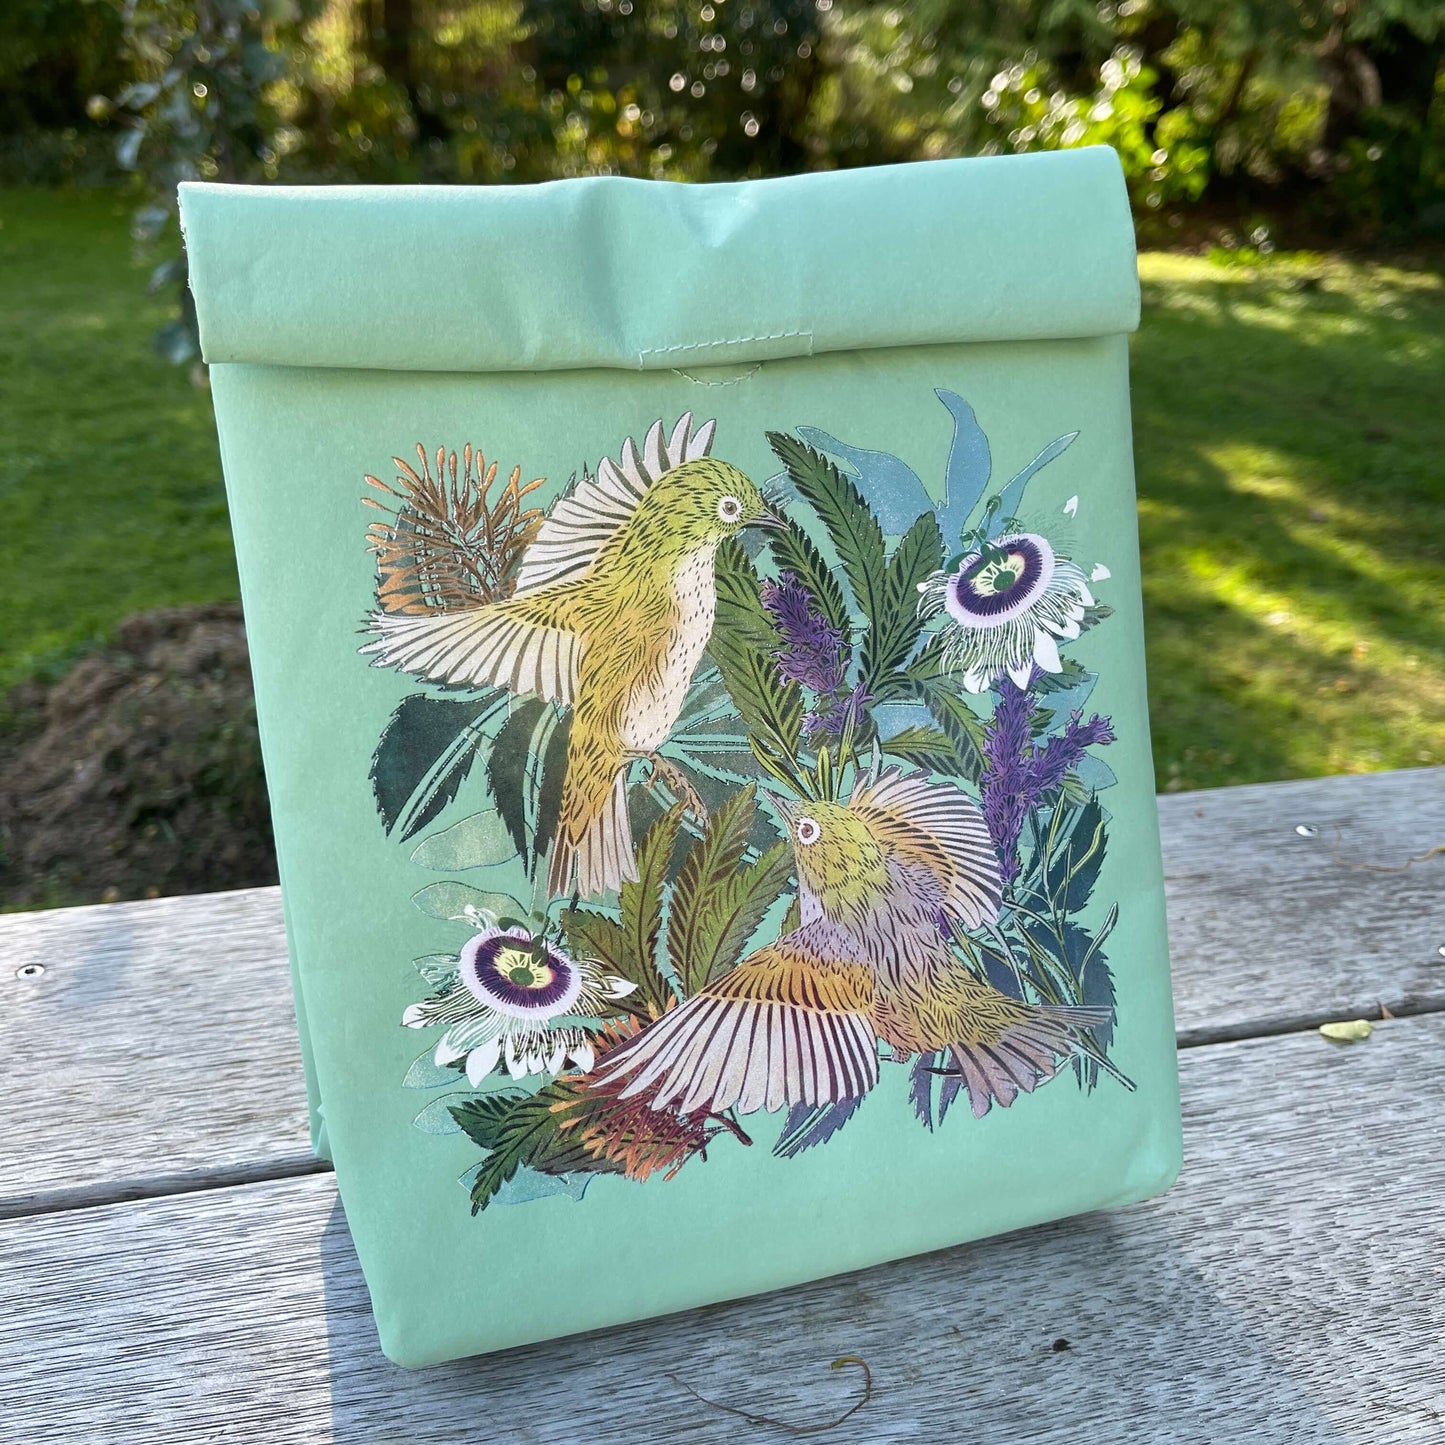 A light blue folding paper style lunch bag with floral and bird design.